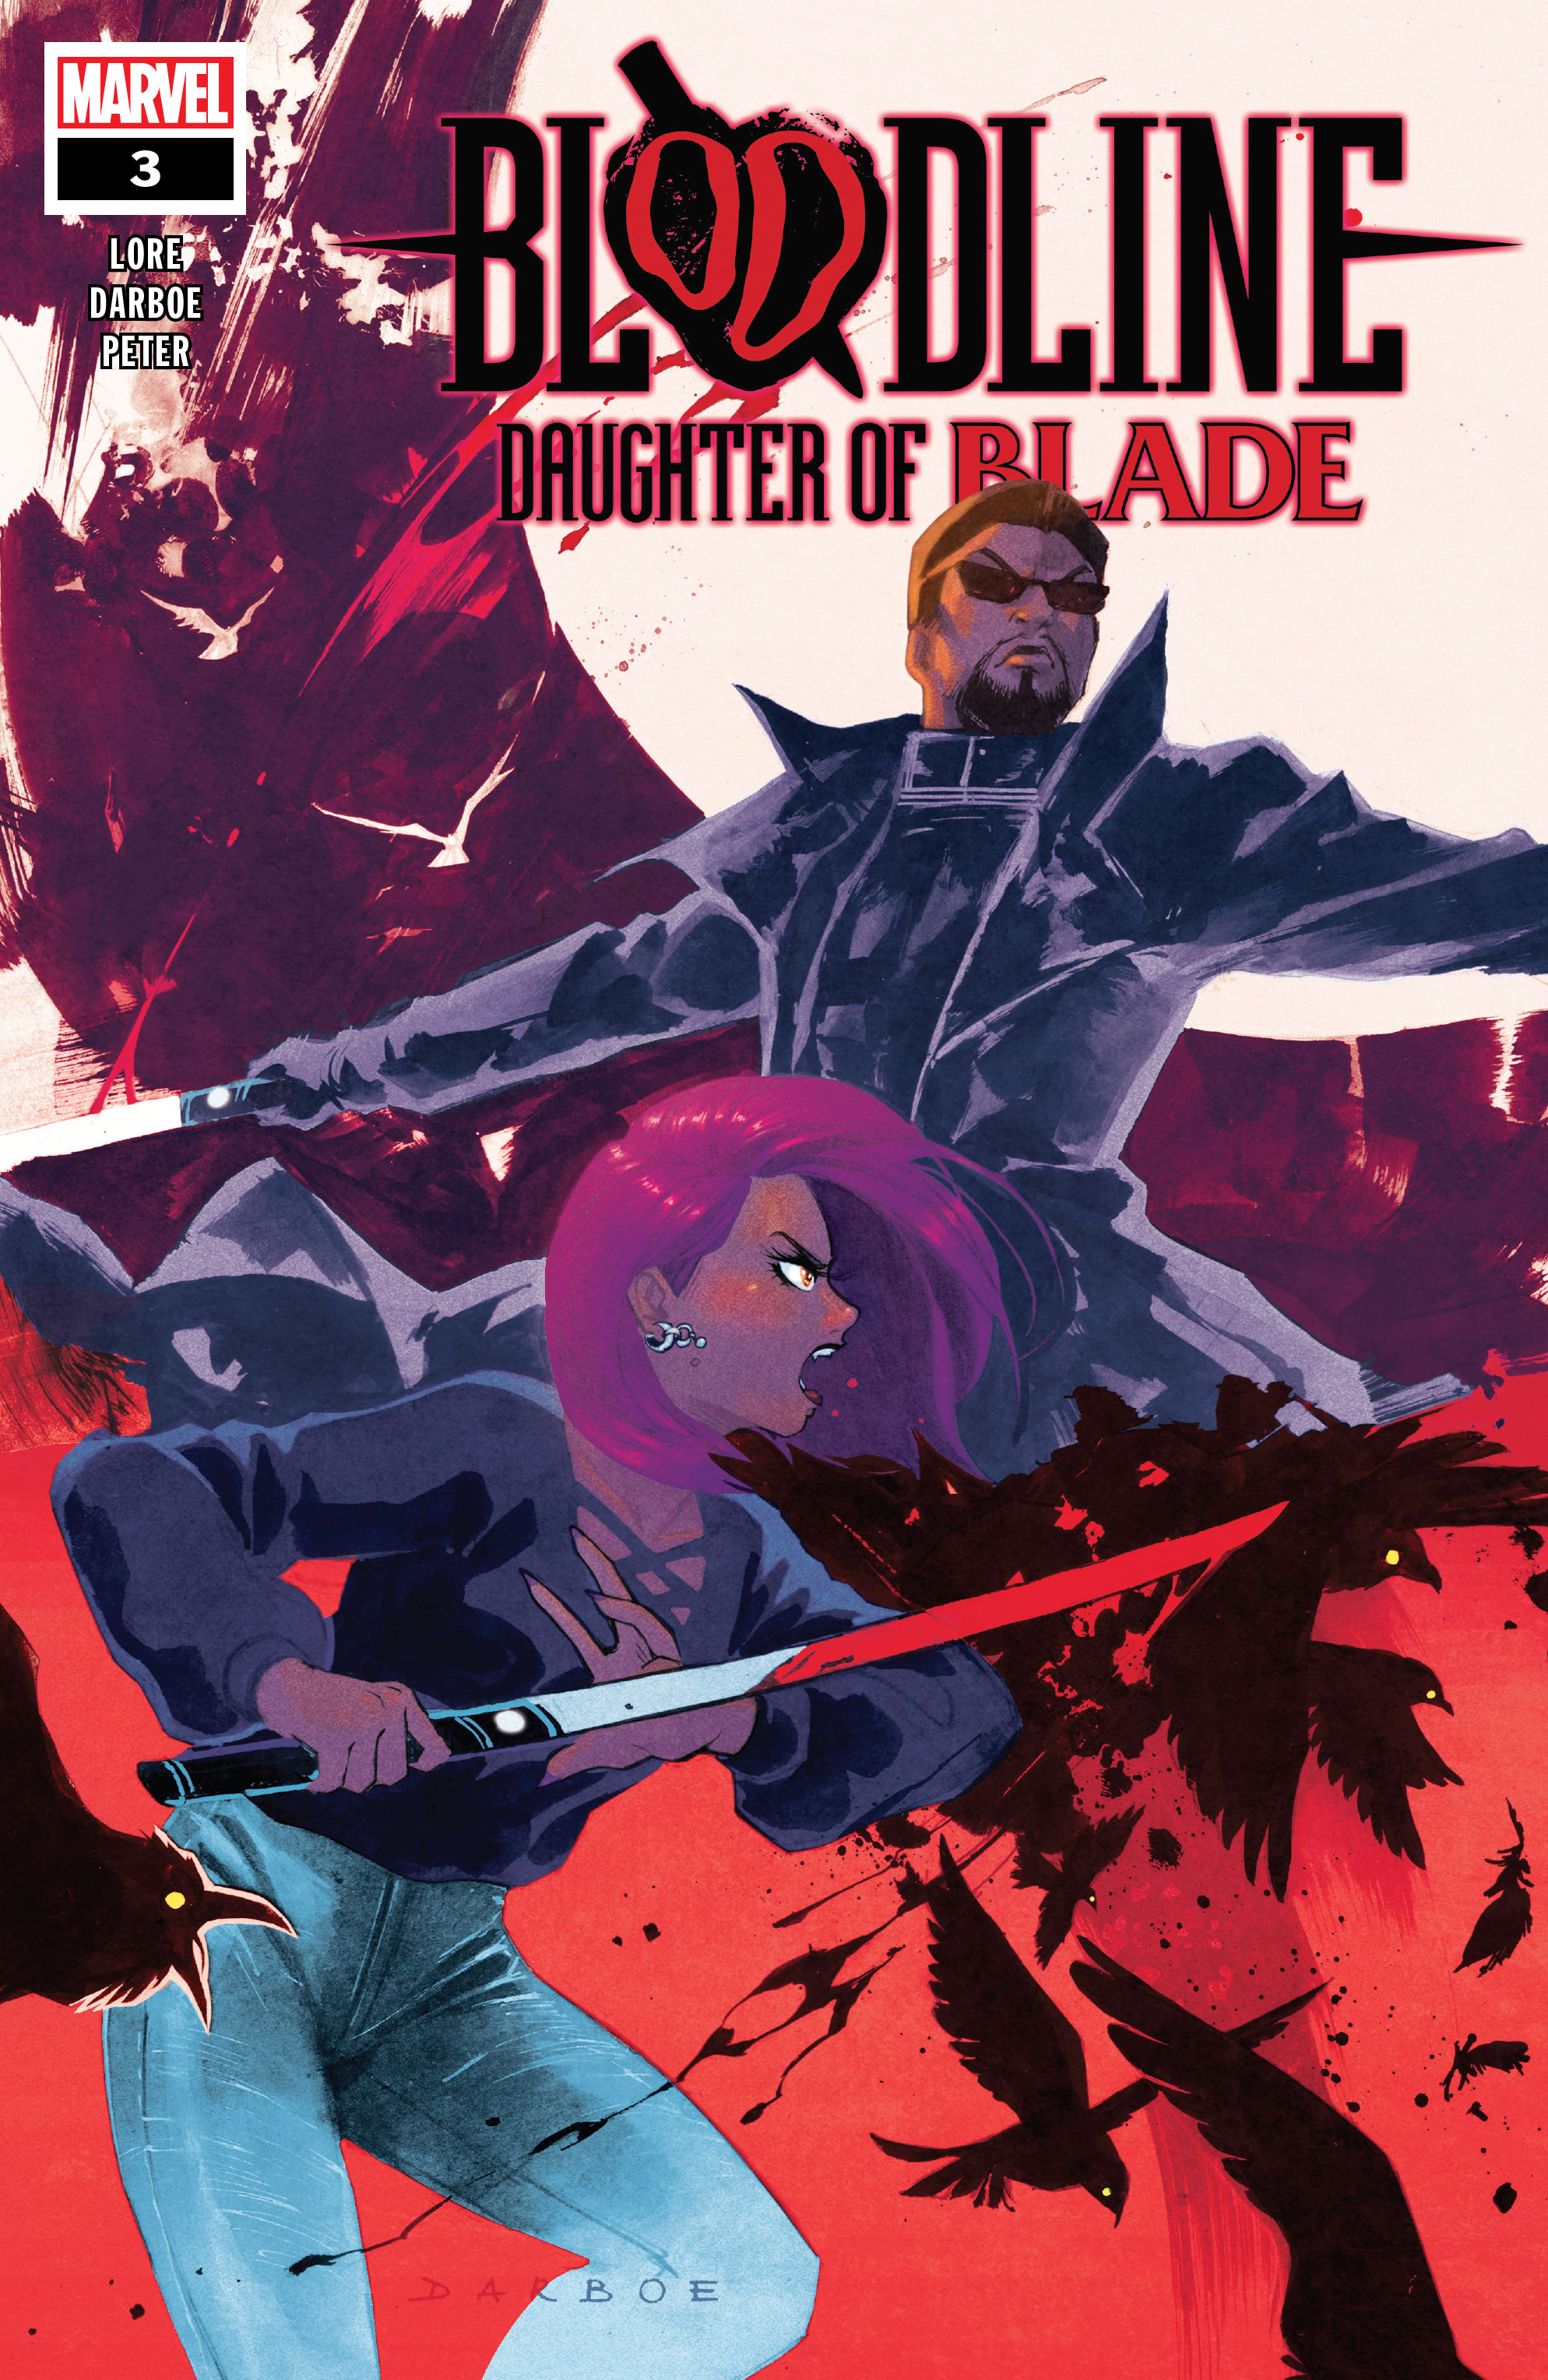 Read online Bloodline: Daughter of Blade comic -  Issue #3 - 1